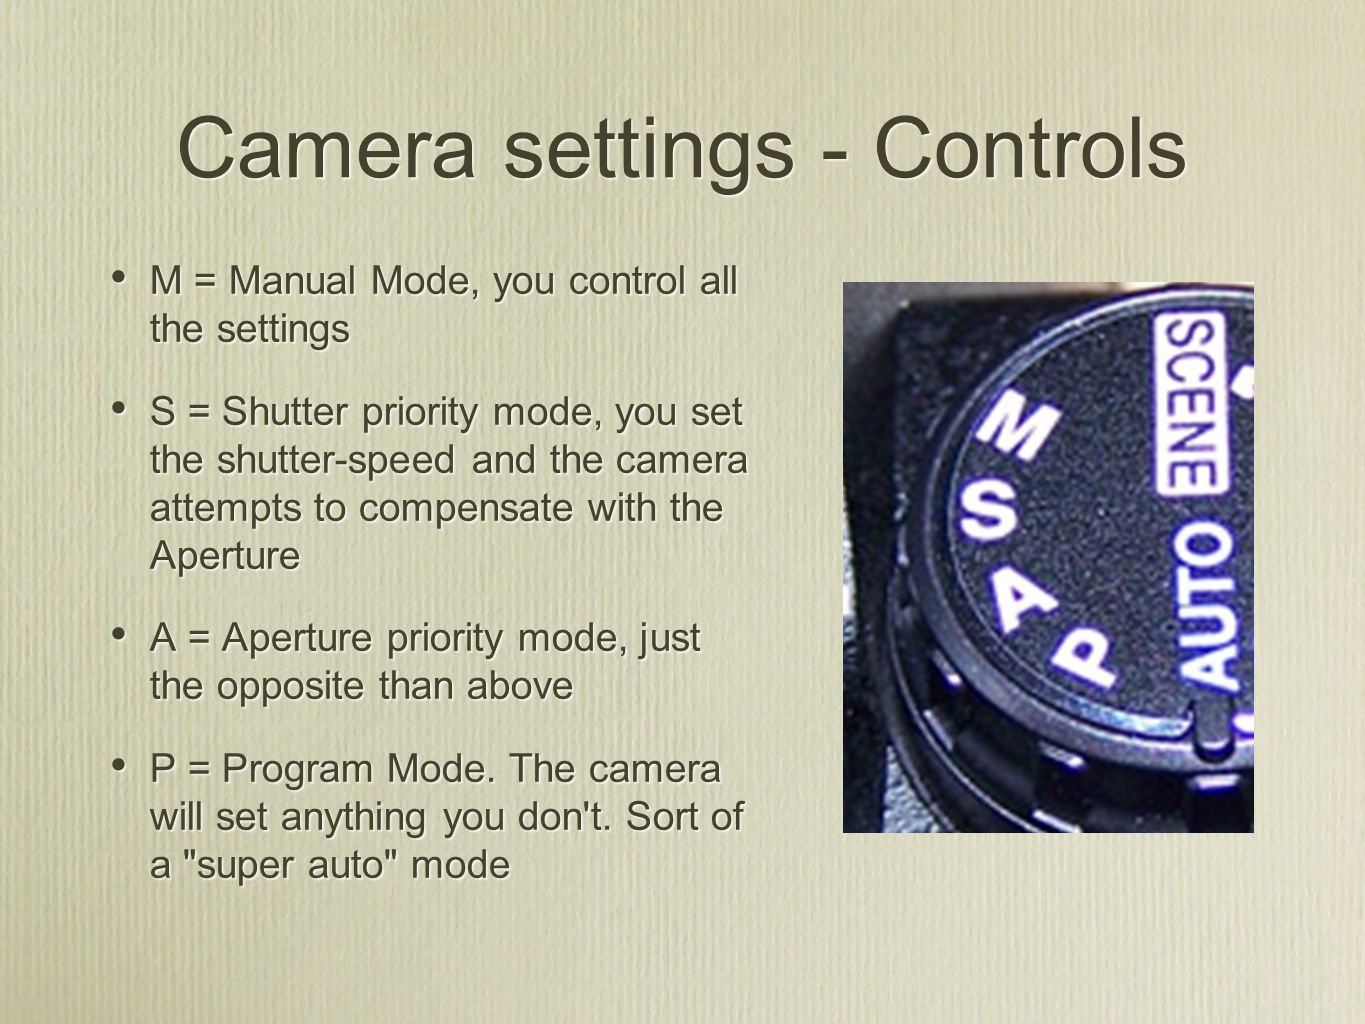 M = Manual Mode, you control all the settings S = Shutter priority mode, you set the shutter-speed and the camera attempts to compensate with the Aperture A = Aperture priority mode, just the opposite than above P = Program Mode.